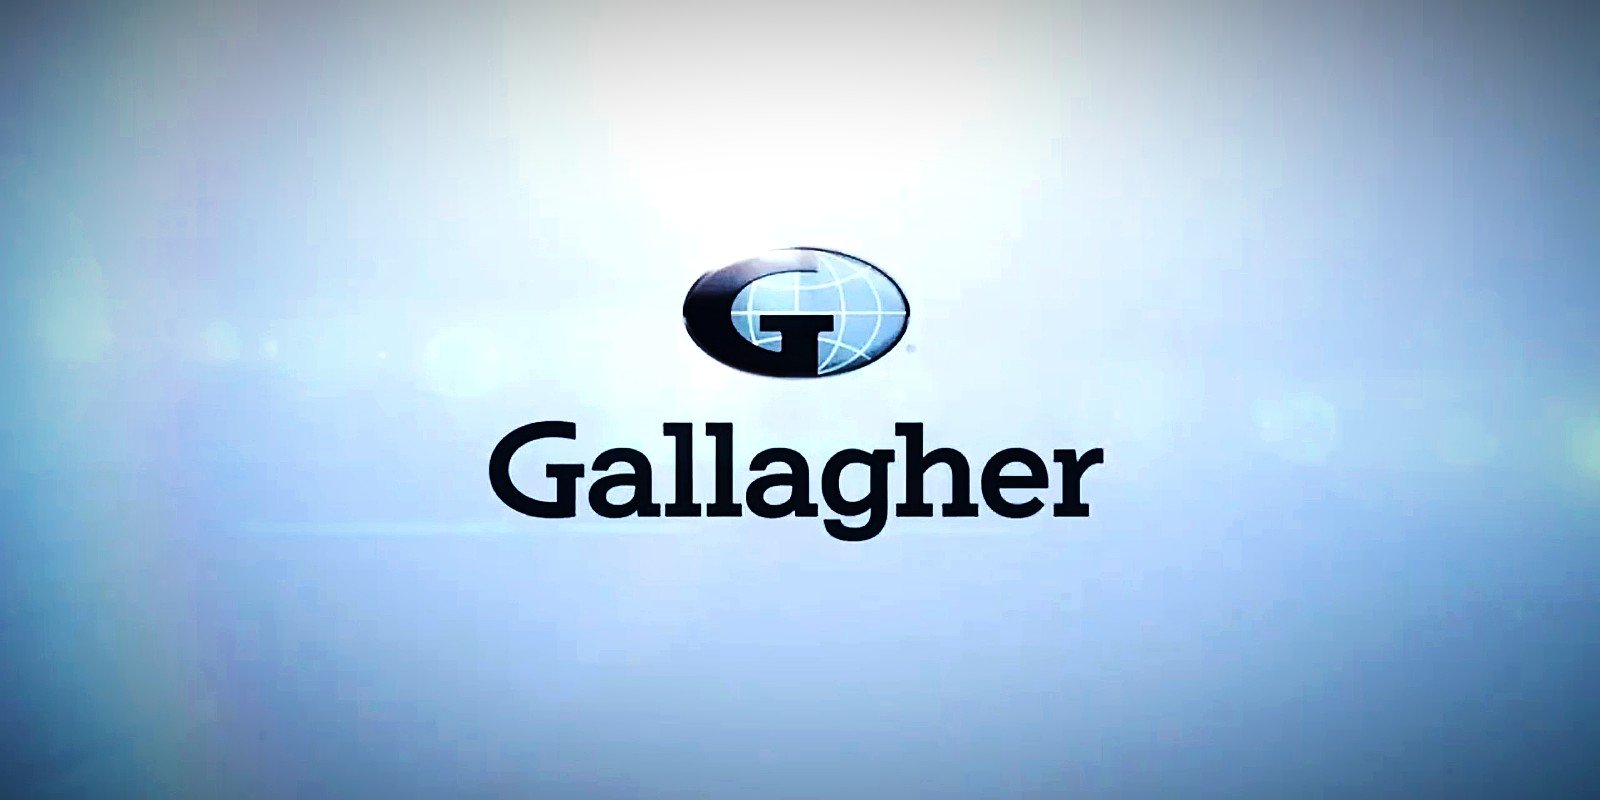 Arthur J. Gallagher insurance giant hit by ransomware